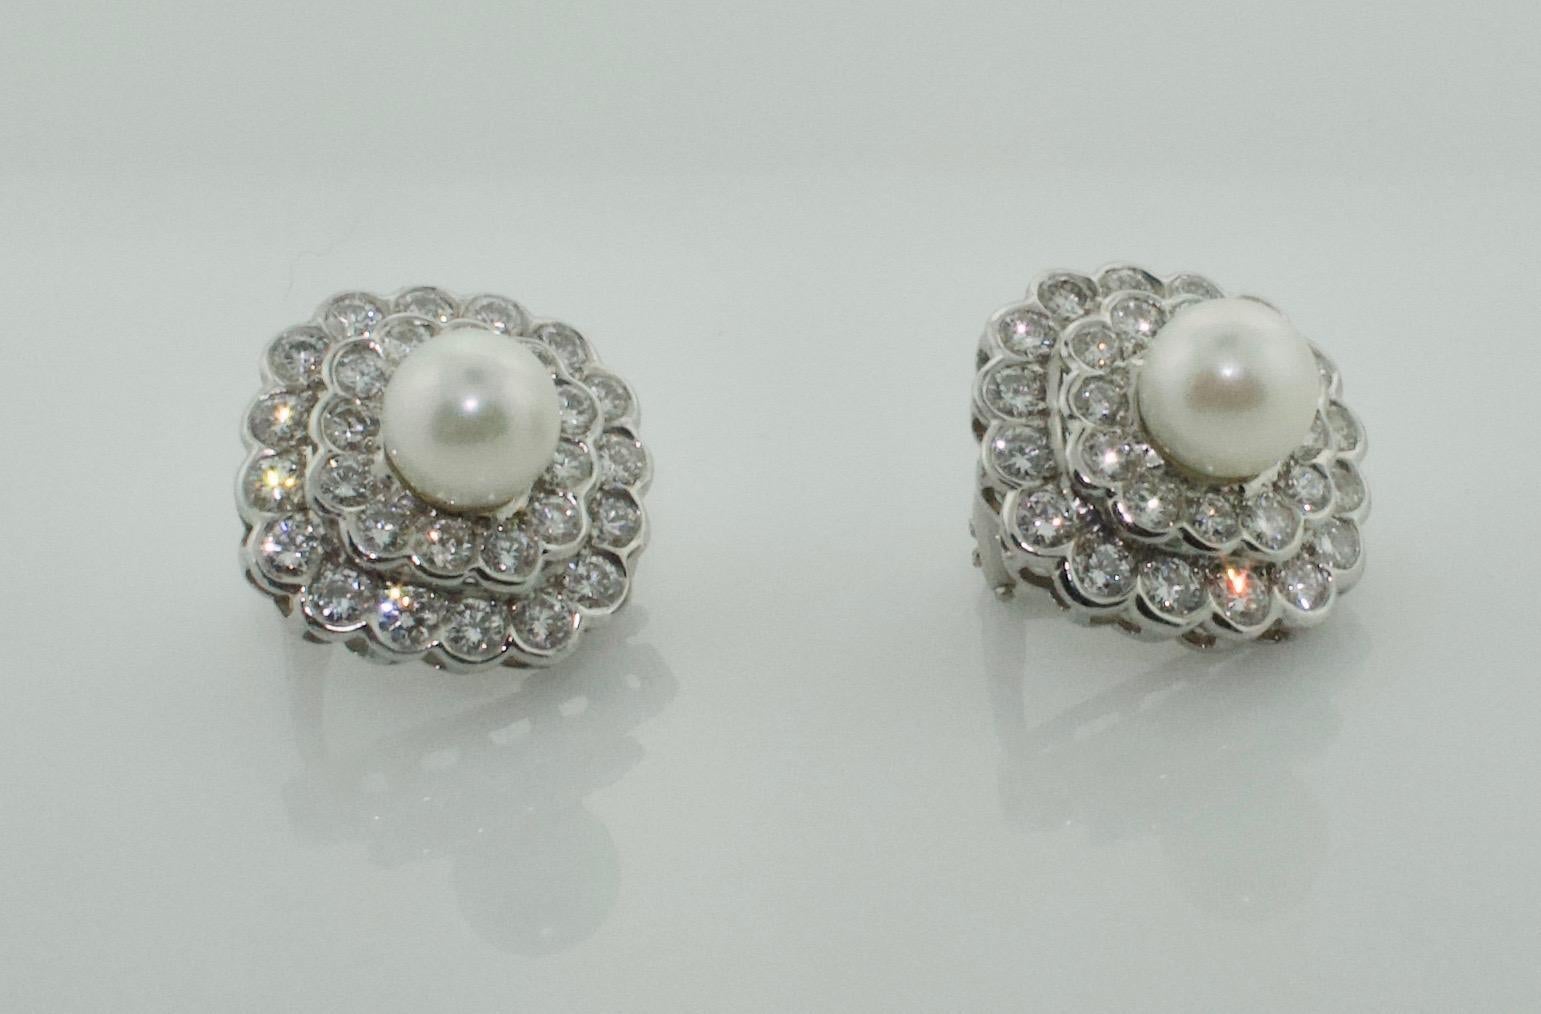 Diamond and Pearl Earrings in Platinum Circa 1950's
Thirty Two Round Brilliant Cut Diamonds weighing 2.60 carats approximately [GH VVS- SI1]
Thirty Two Round Brilliant Cut Diamonds weighing 1.10 carats approximately [GH VVS- SI1]
Two Round Cultured